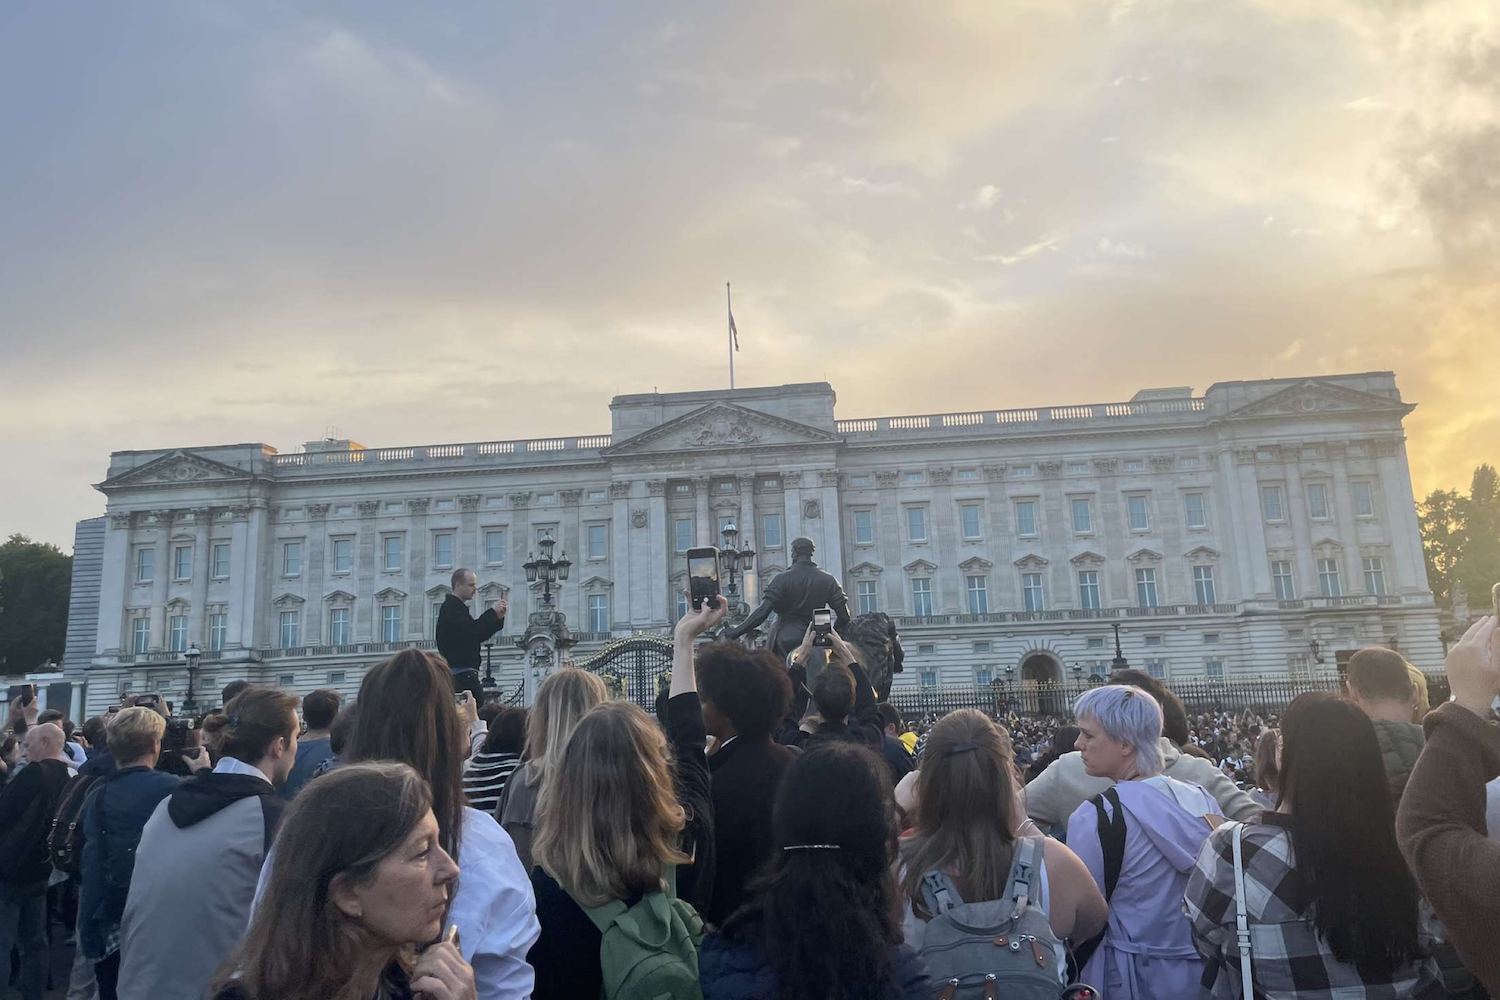 Crowds gather outside of Buckingham Palace Sept. 8. Following the death of Queen Elizabeth II, London residents flocked to the Palace to mourn and honor her 70-year reign.